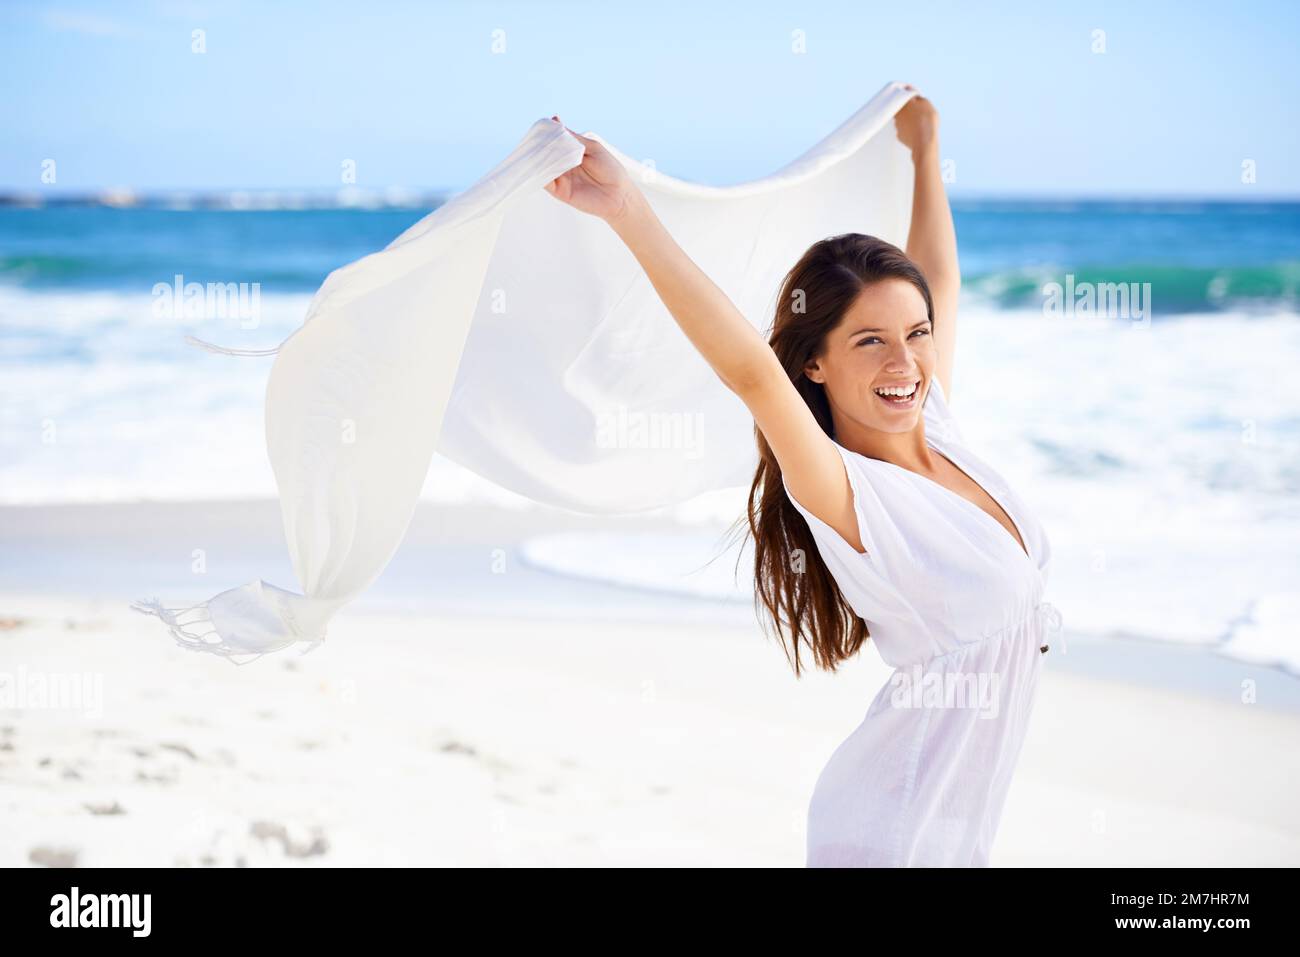 Summer style.A beautiful young woman on the beach holding a white scarf thats blowing in the wind. Stock Photo